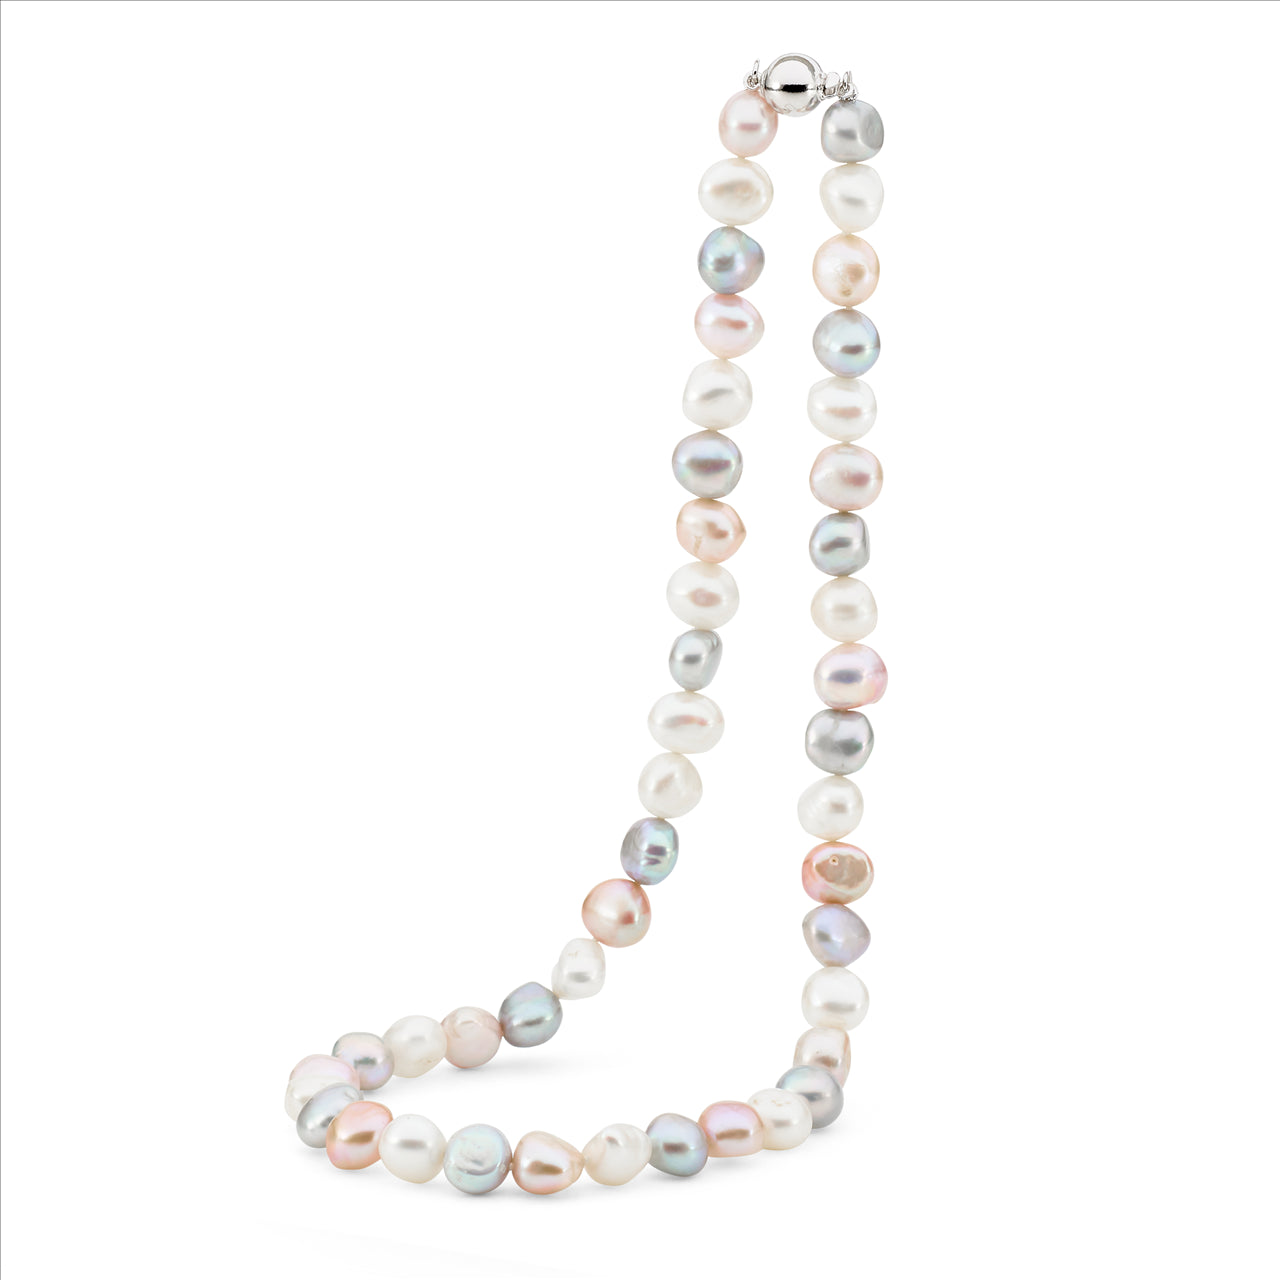 Ikecho Sterling Silver White, Gray & Pink Baroque Pearl Strand